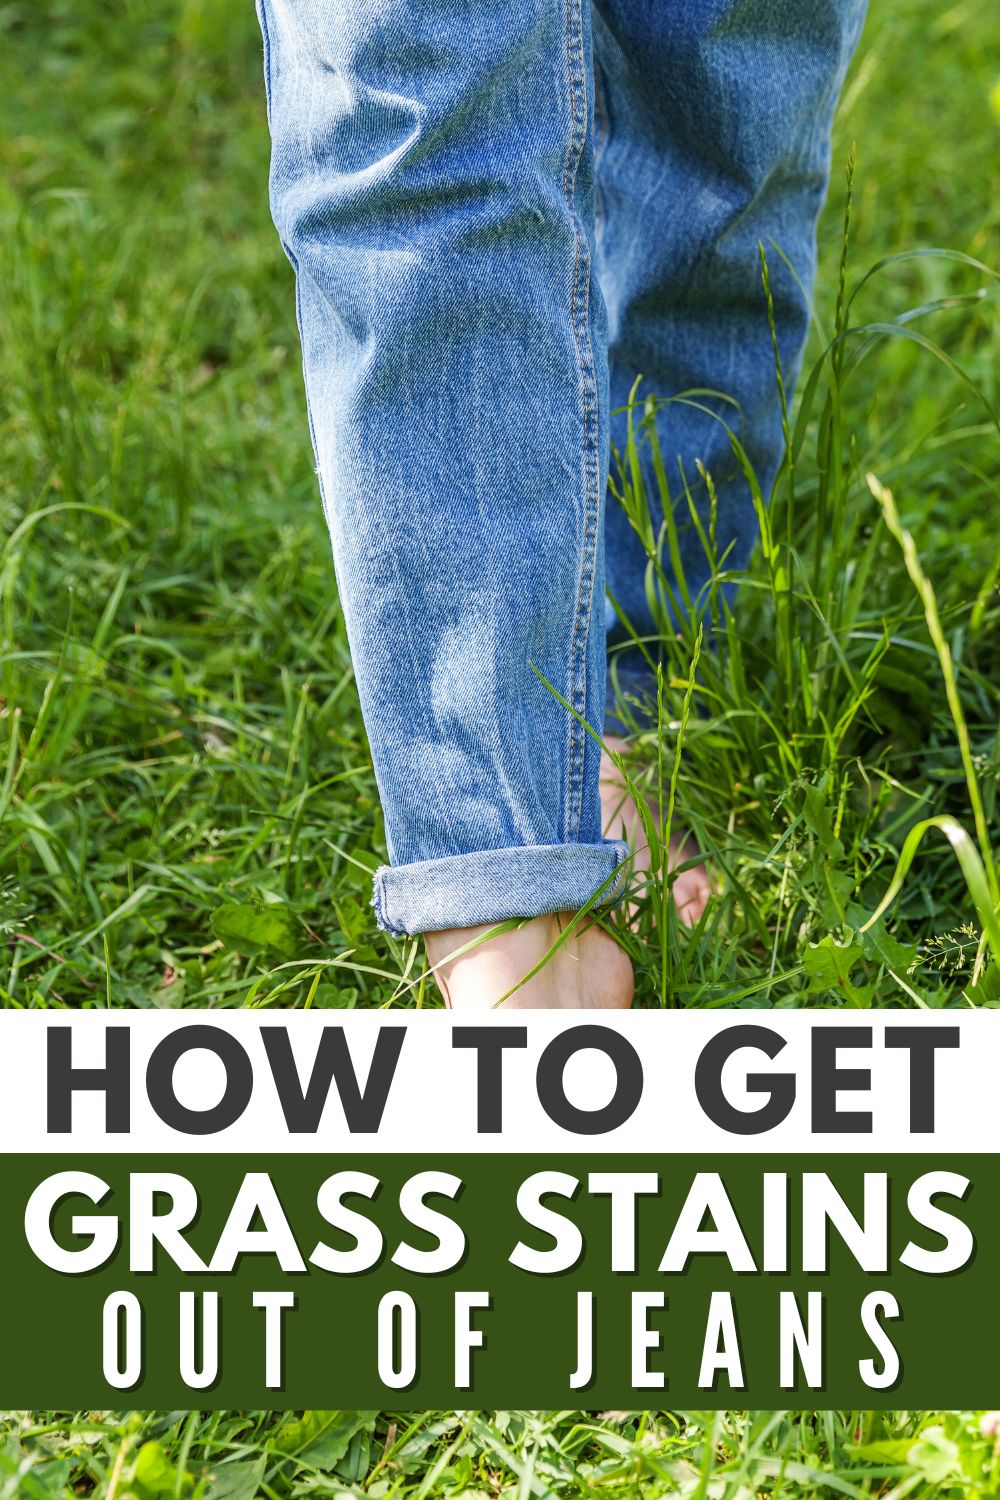 Discover effective methods to remove grass stains from jeans quickly and easily.